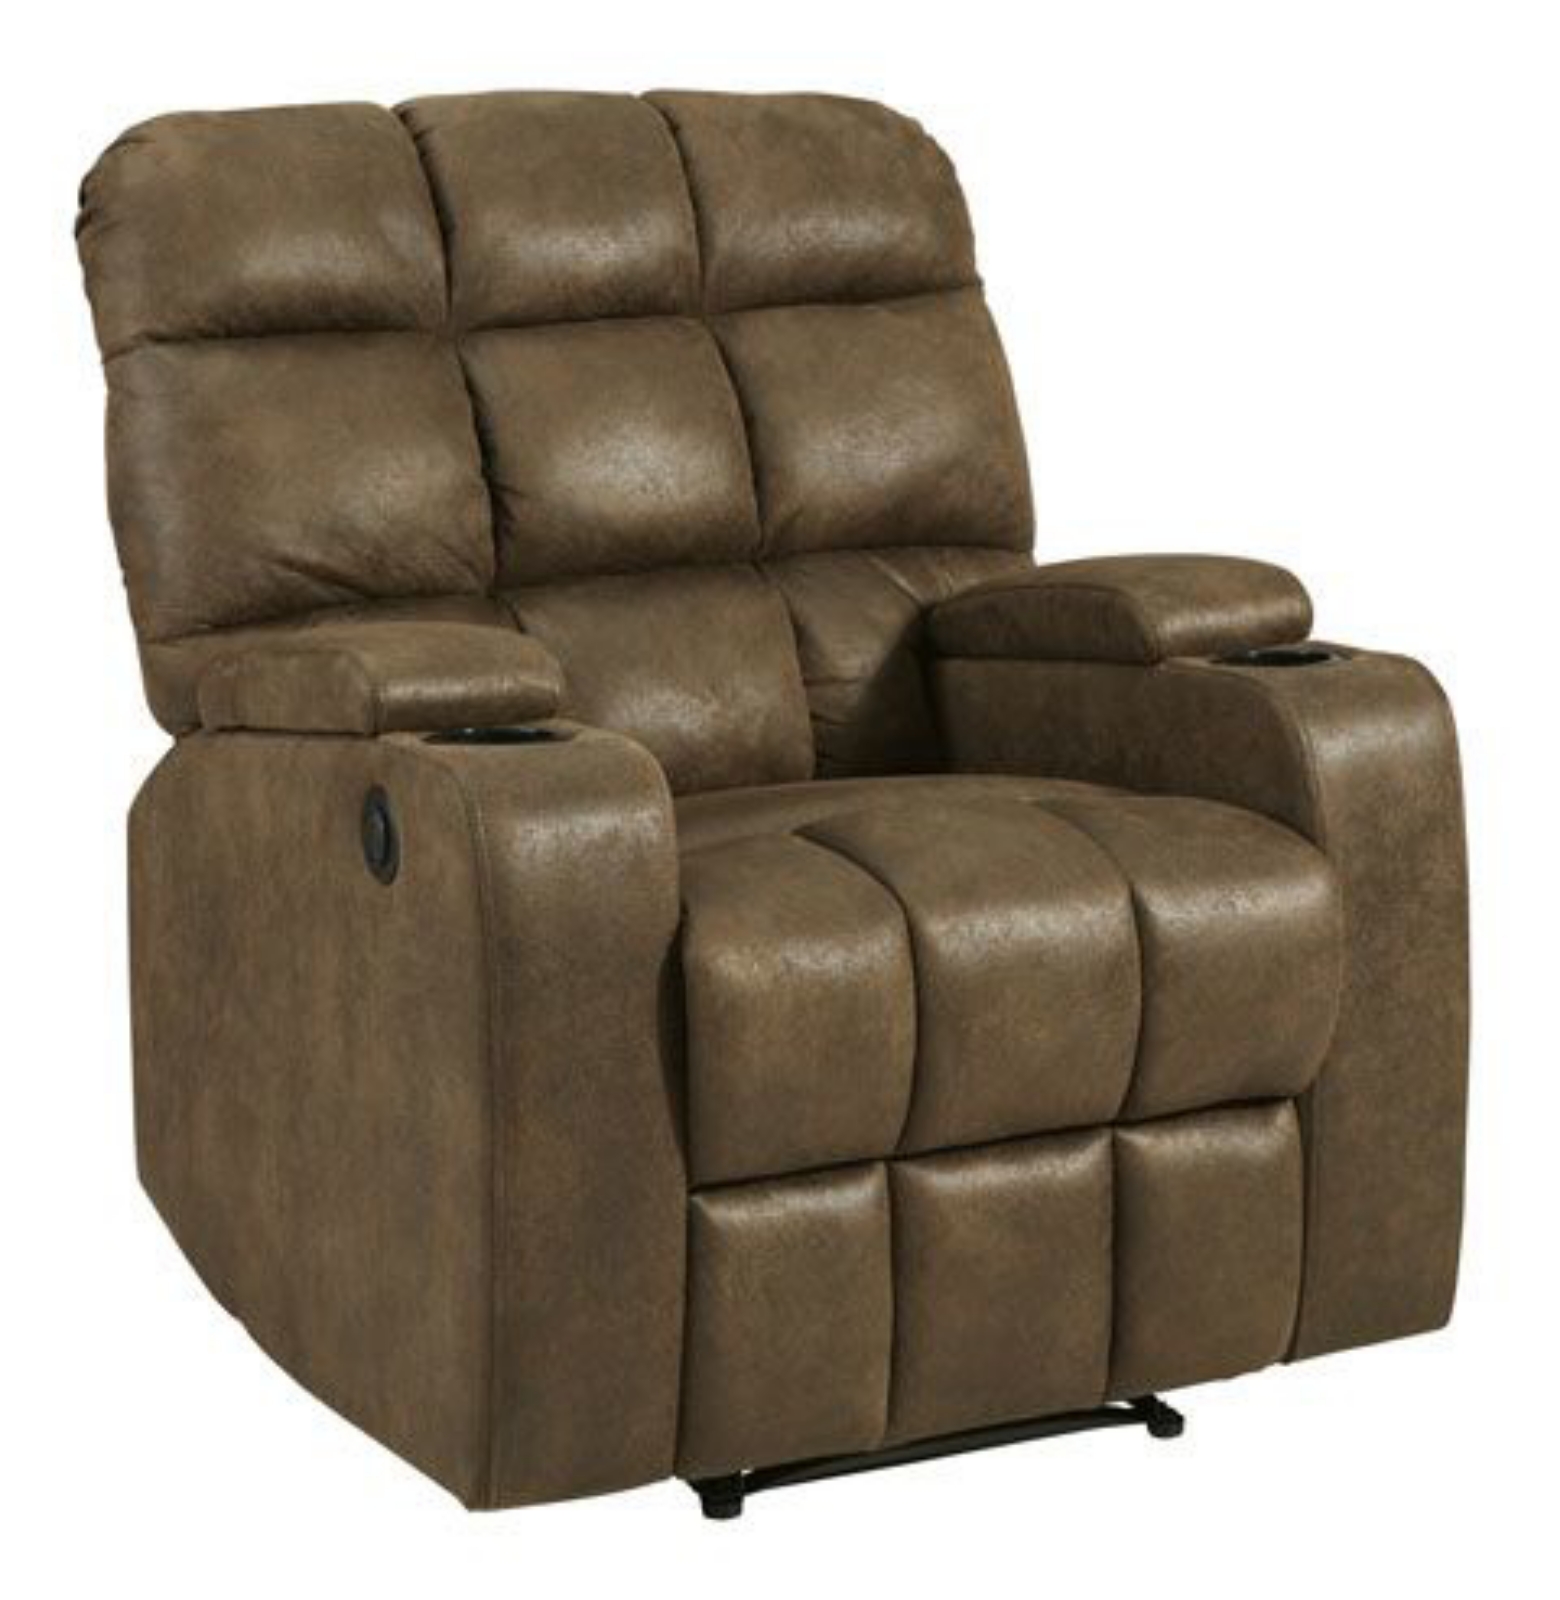 Picture of Ashley Kennebec Power Recliner, Brown